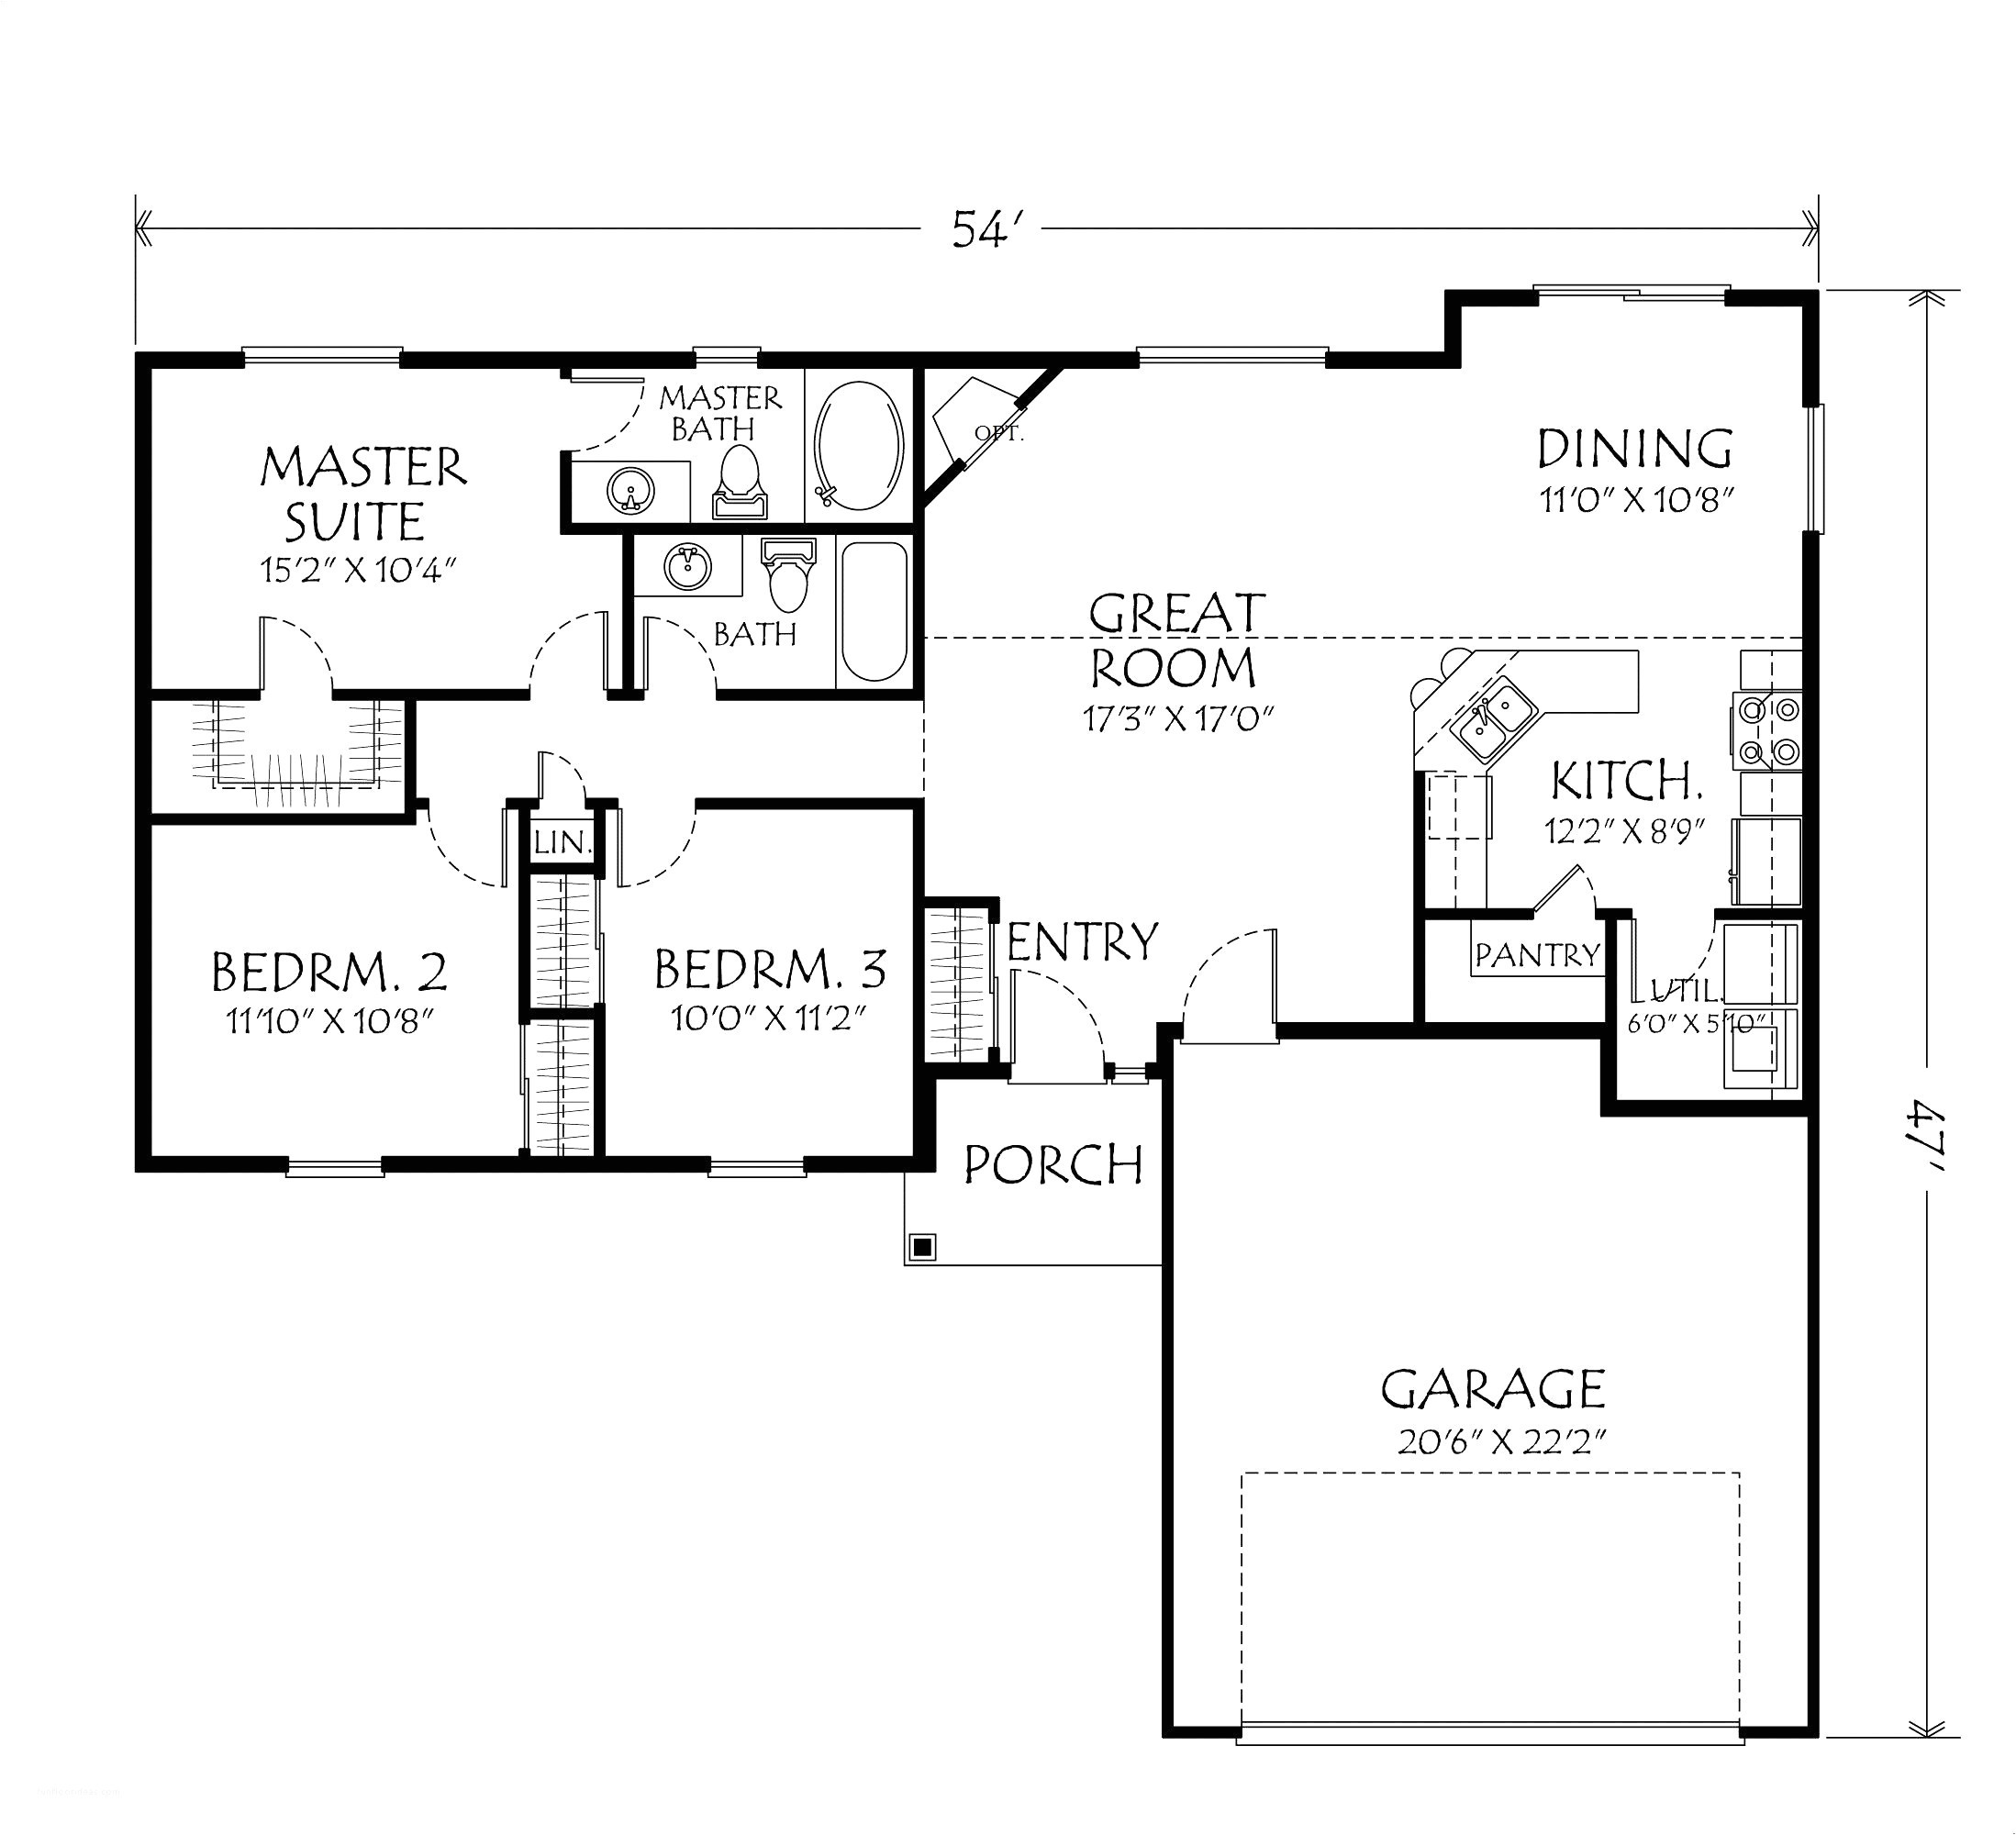 shaddock homes floor plans awesome shaddock homes floor plans beautiful 368 best house plans